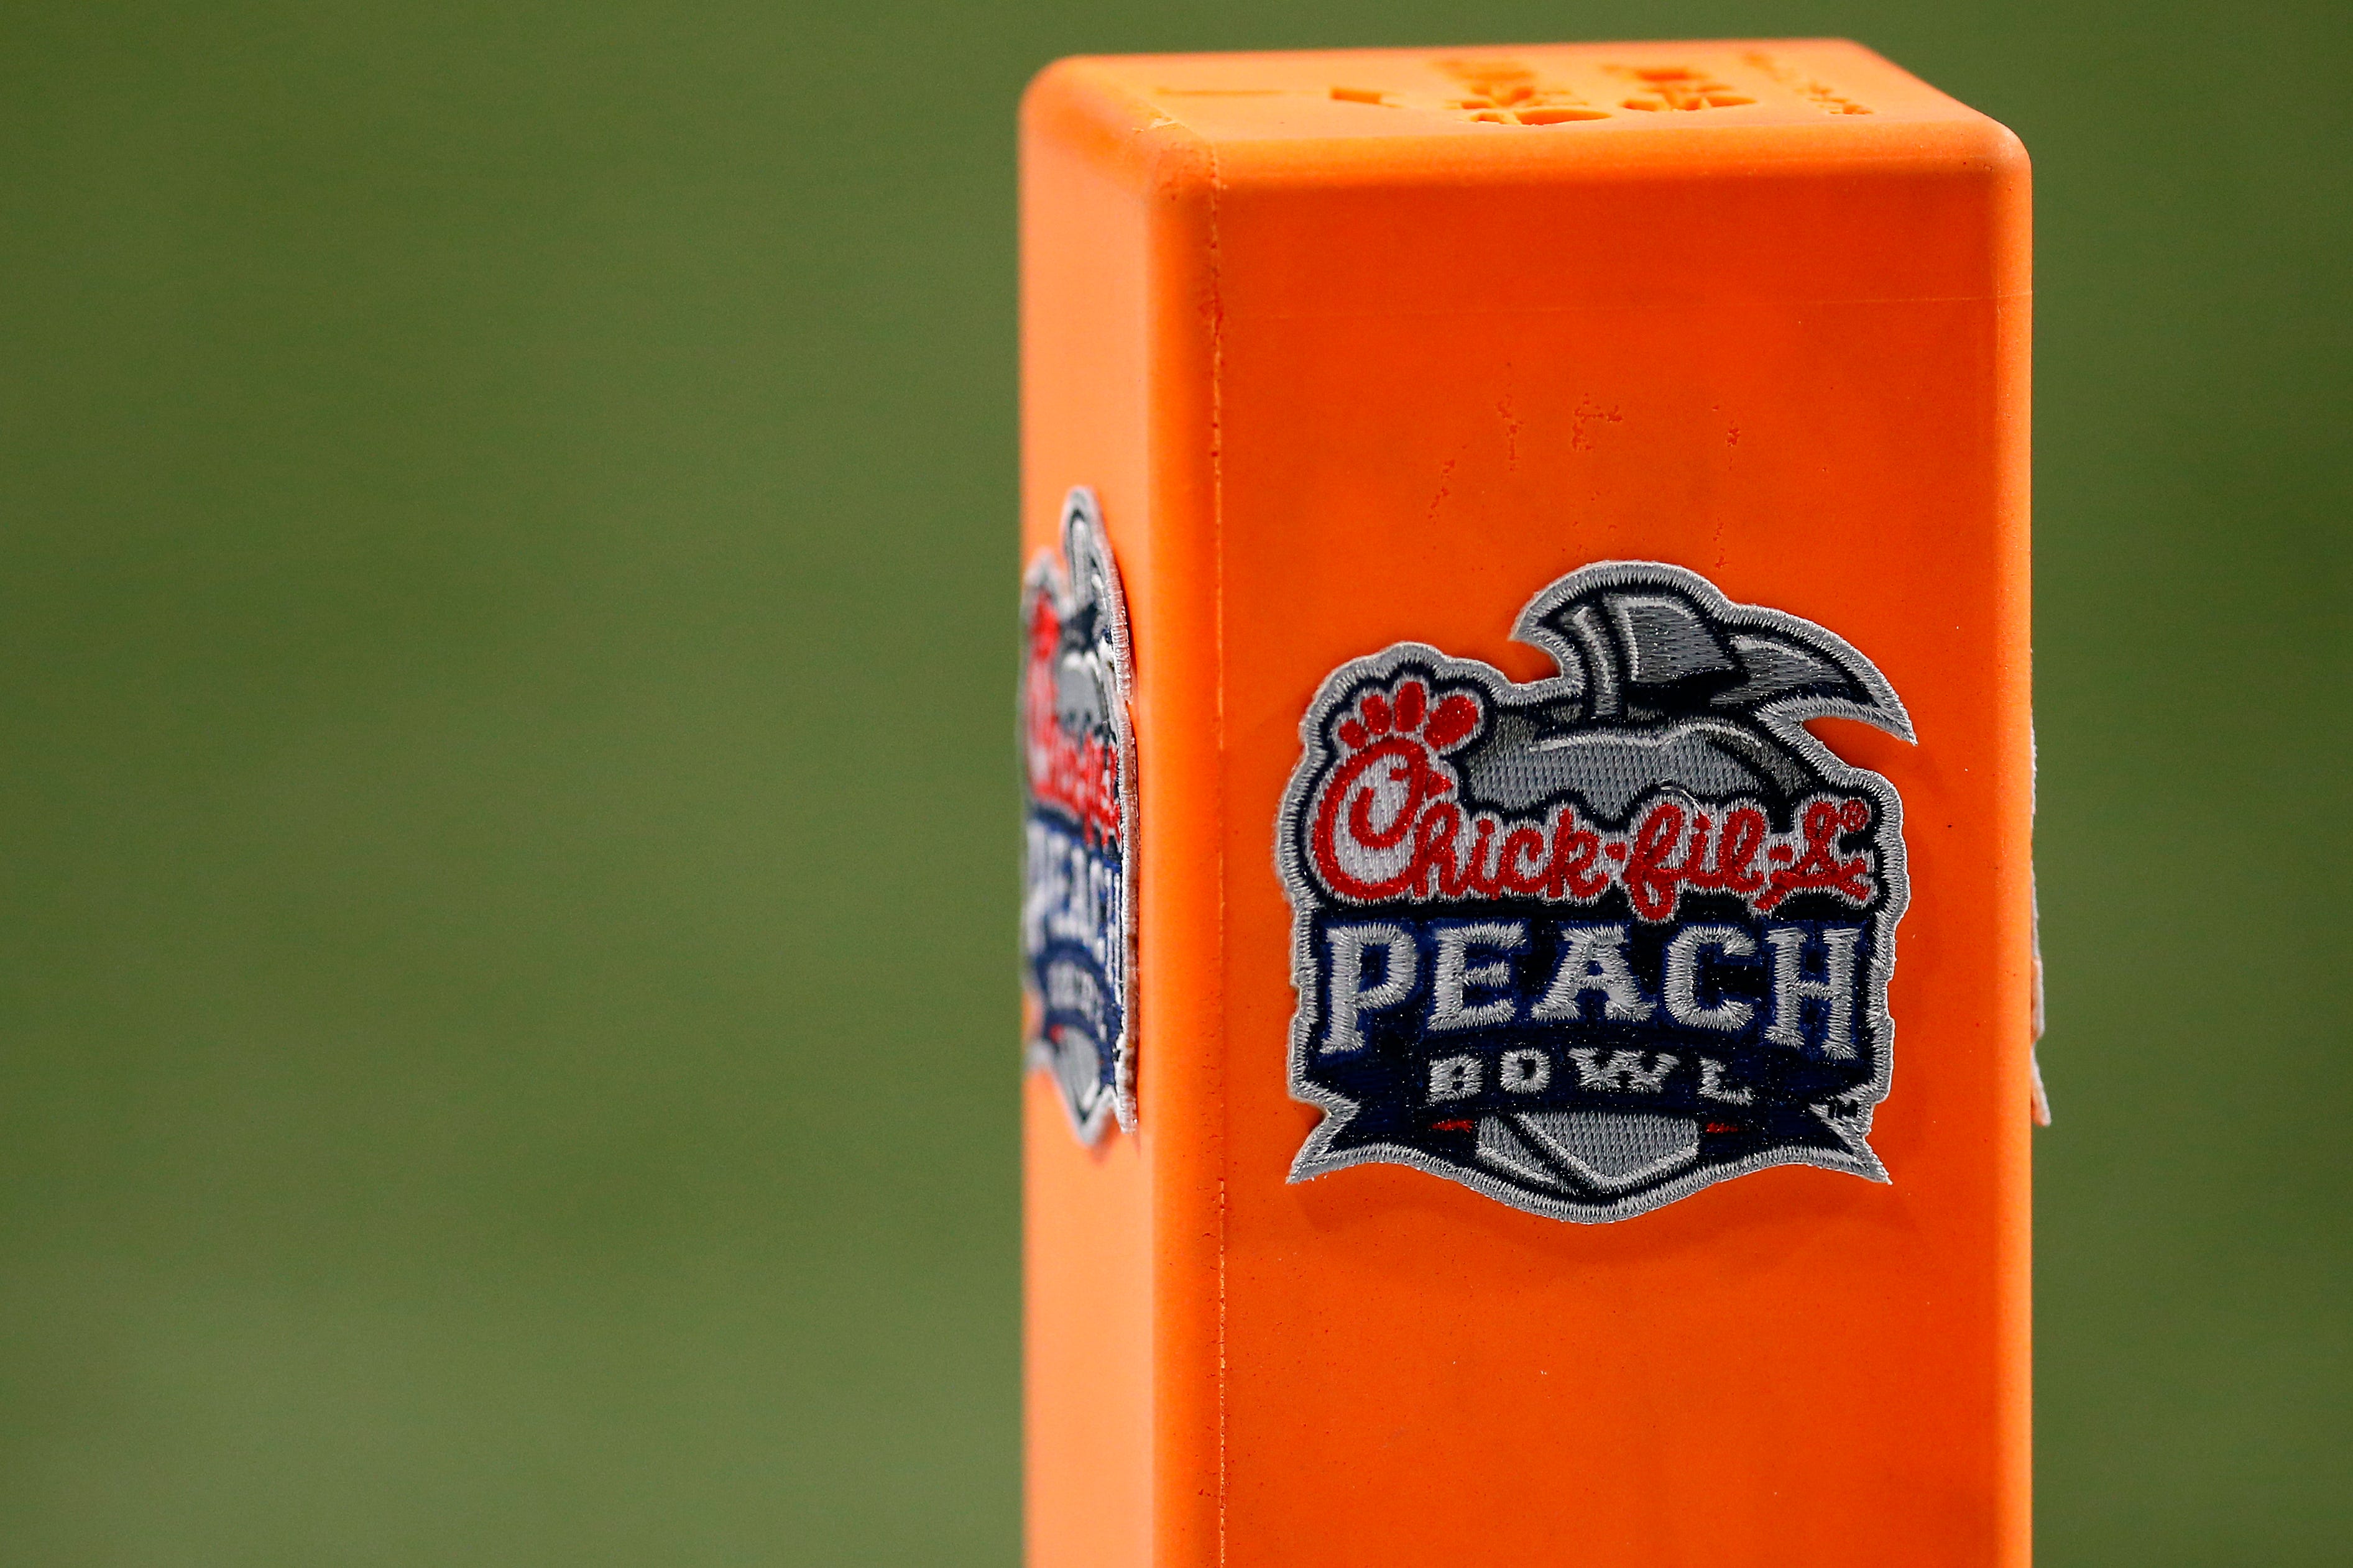 Pylons carry the Peach Bowl logo in the end zone during the third quarter of the Chick-fil-a Peach Bowl at Mercedes-Benz Stadium in Atlanta on Friday, Jan. 1, 2021. A last-minute field goal sealed a 24-21 win for the Bulldogs, leaving the Bearcats 9-1 on the season. Cincinnati Bearcats Vs Georgia Bulldogs Peach Bowl